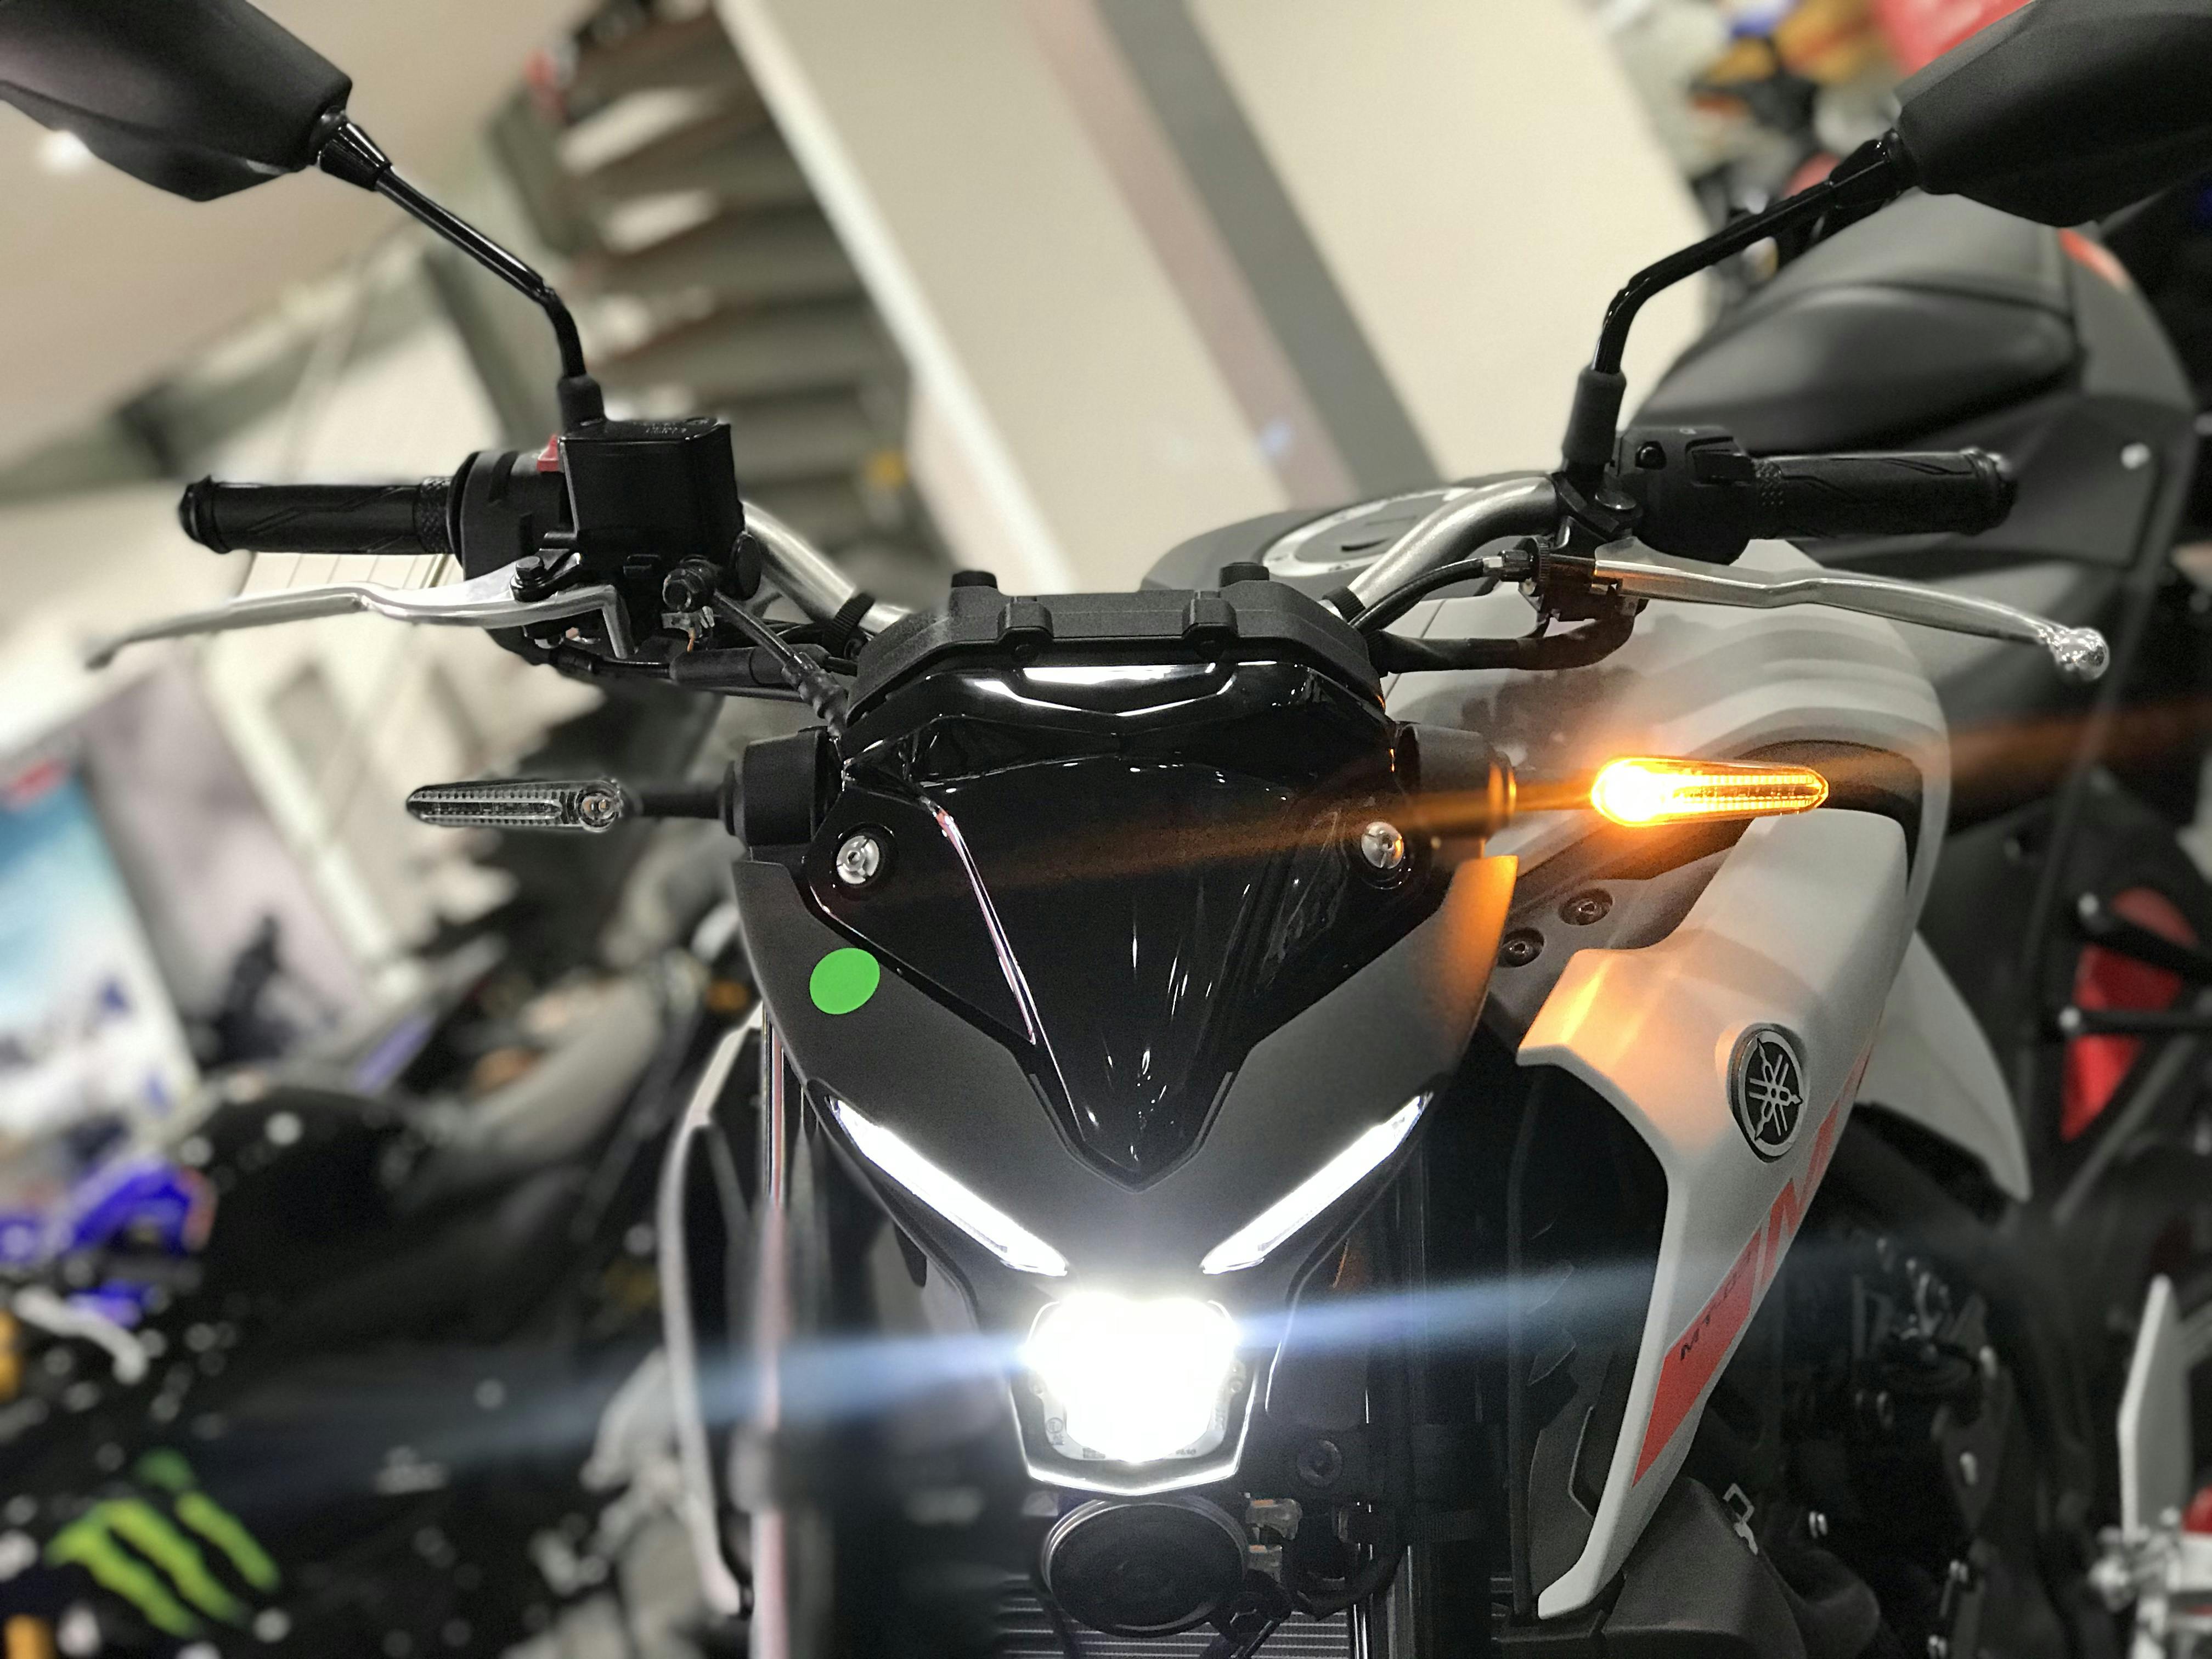 A close up of the headlights on the 2020 Yamaha MT03